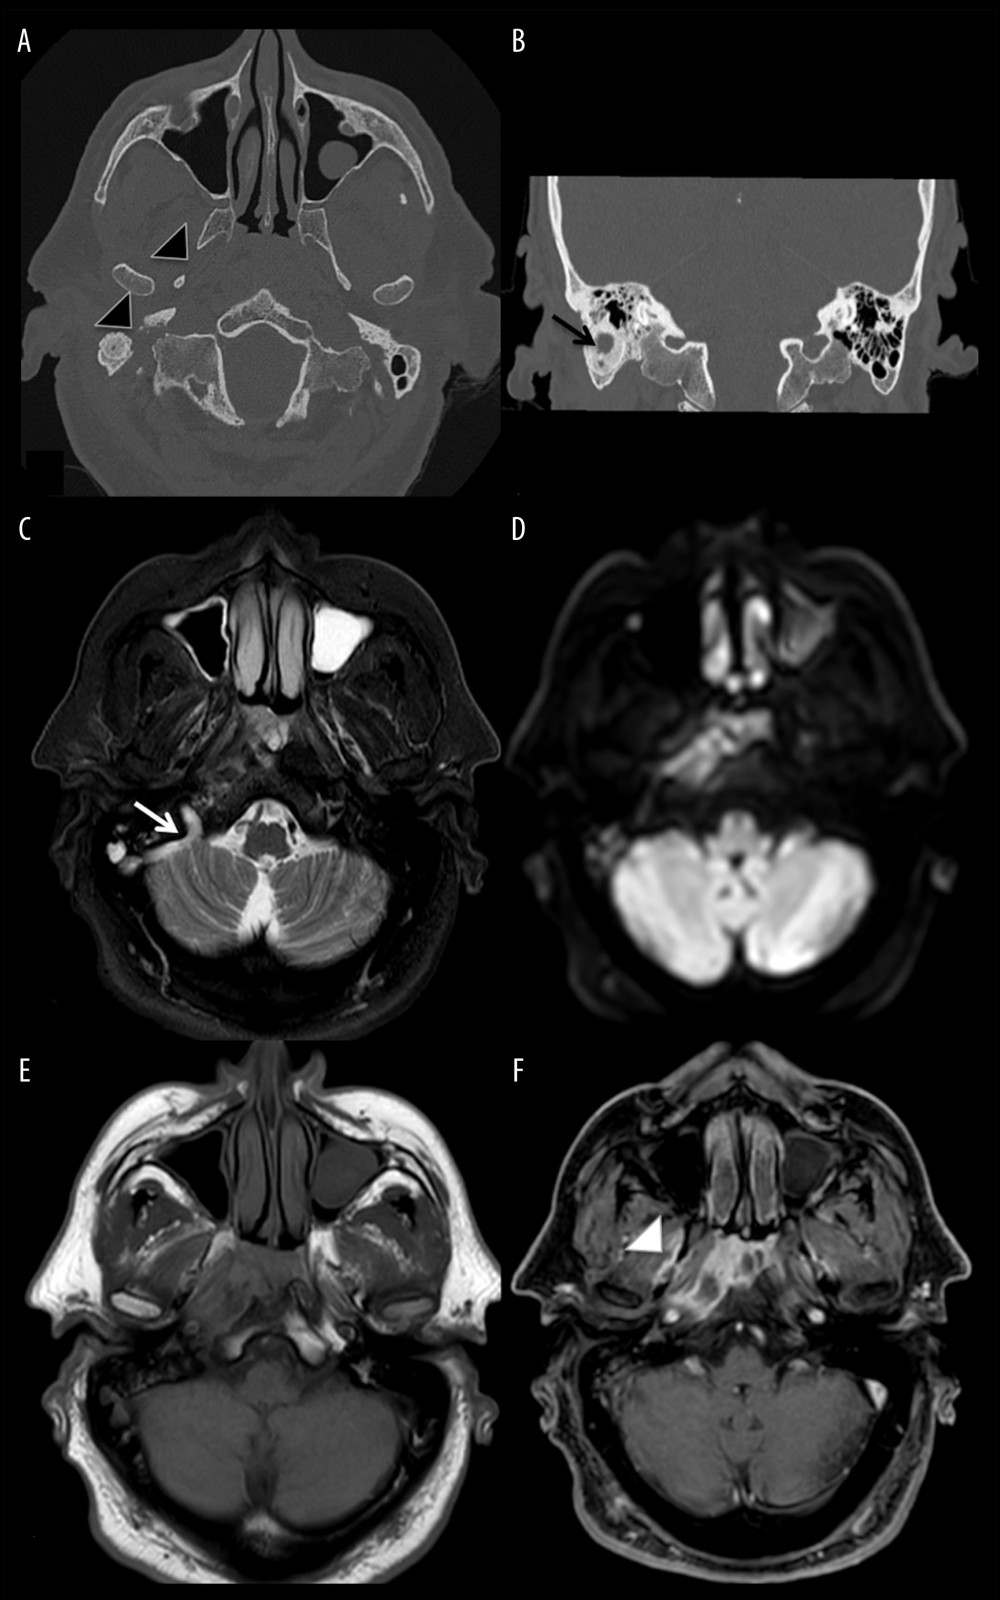 Case 1 – Imaging of the petrous bone in a patient with right external necrotizing otitis extended to the skull base: axial and coronal unenhanced CT scan (A, B) showed asymmetric nasopharynx air lumen due to prominent soft tissue swelling on the right side, with opacification of the mastoid air cells; extensive erosive phenomena of the petrous bone and the pterygoid process were also visible (black arrowheads) along with areas of osteitic thickening of the mastoid (black arrow); axial unenhanced (C–E) and contrast-enhanced MRI (F) showed a large area of altered signal within the right temporal bone extending from pharyngeal mucosal space, para-pharyngeal space and retro-pharyngeal space to external auditory canal and retrocondylar fat tissue, with restricted diffusion and inhomogeneous post-contrast enhancement involving pterygoid muscles (white arrowhead) as well as tensor and elevator muscles of the palatine veil. Local nerves and vascular structures were also involved, with mild reduction of the intra-petrous internal carotid artery flow signal and jugular bulb/upper internal jugular vein obliteration with slow flow in the sigmoid sinus (white arrow), probably due to external compression by the surrounding tissues.